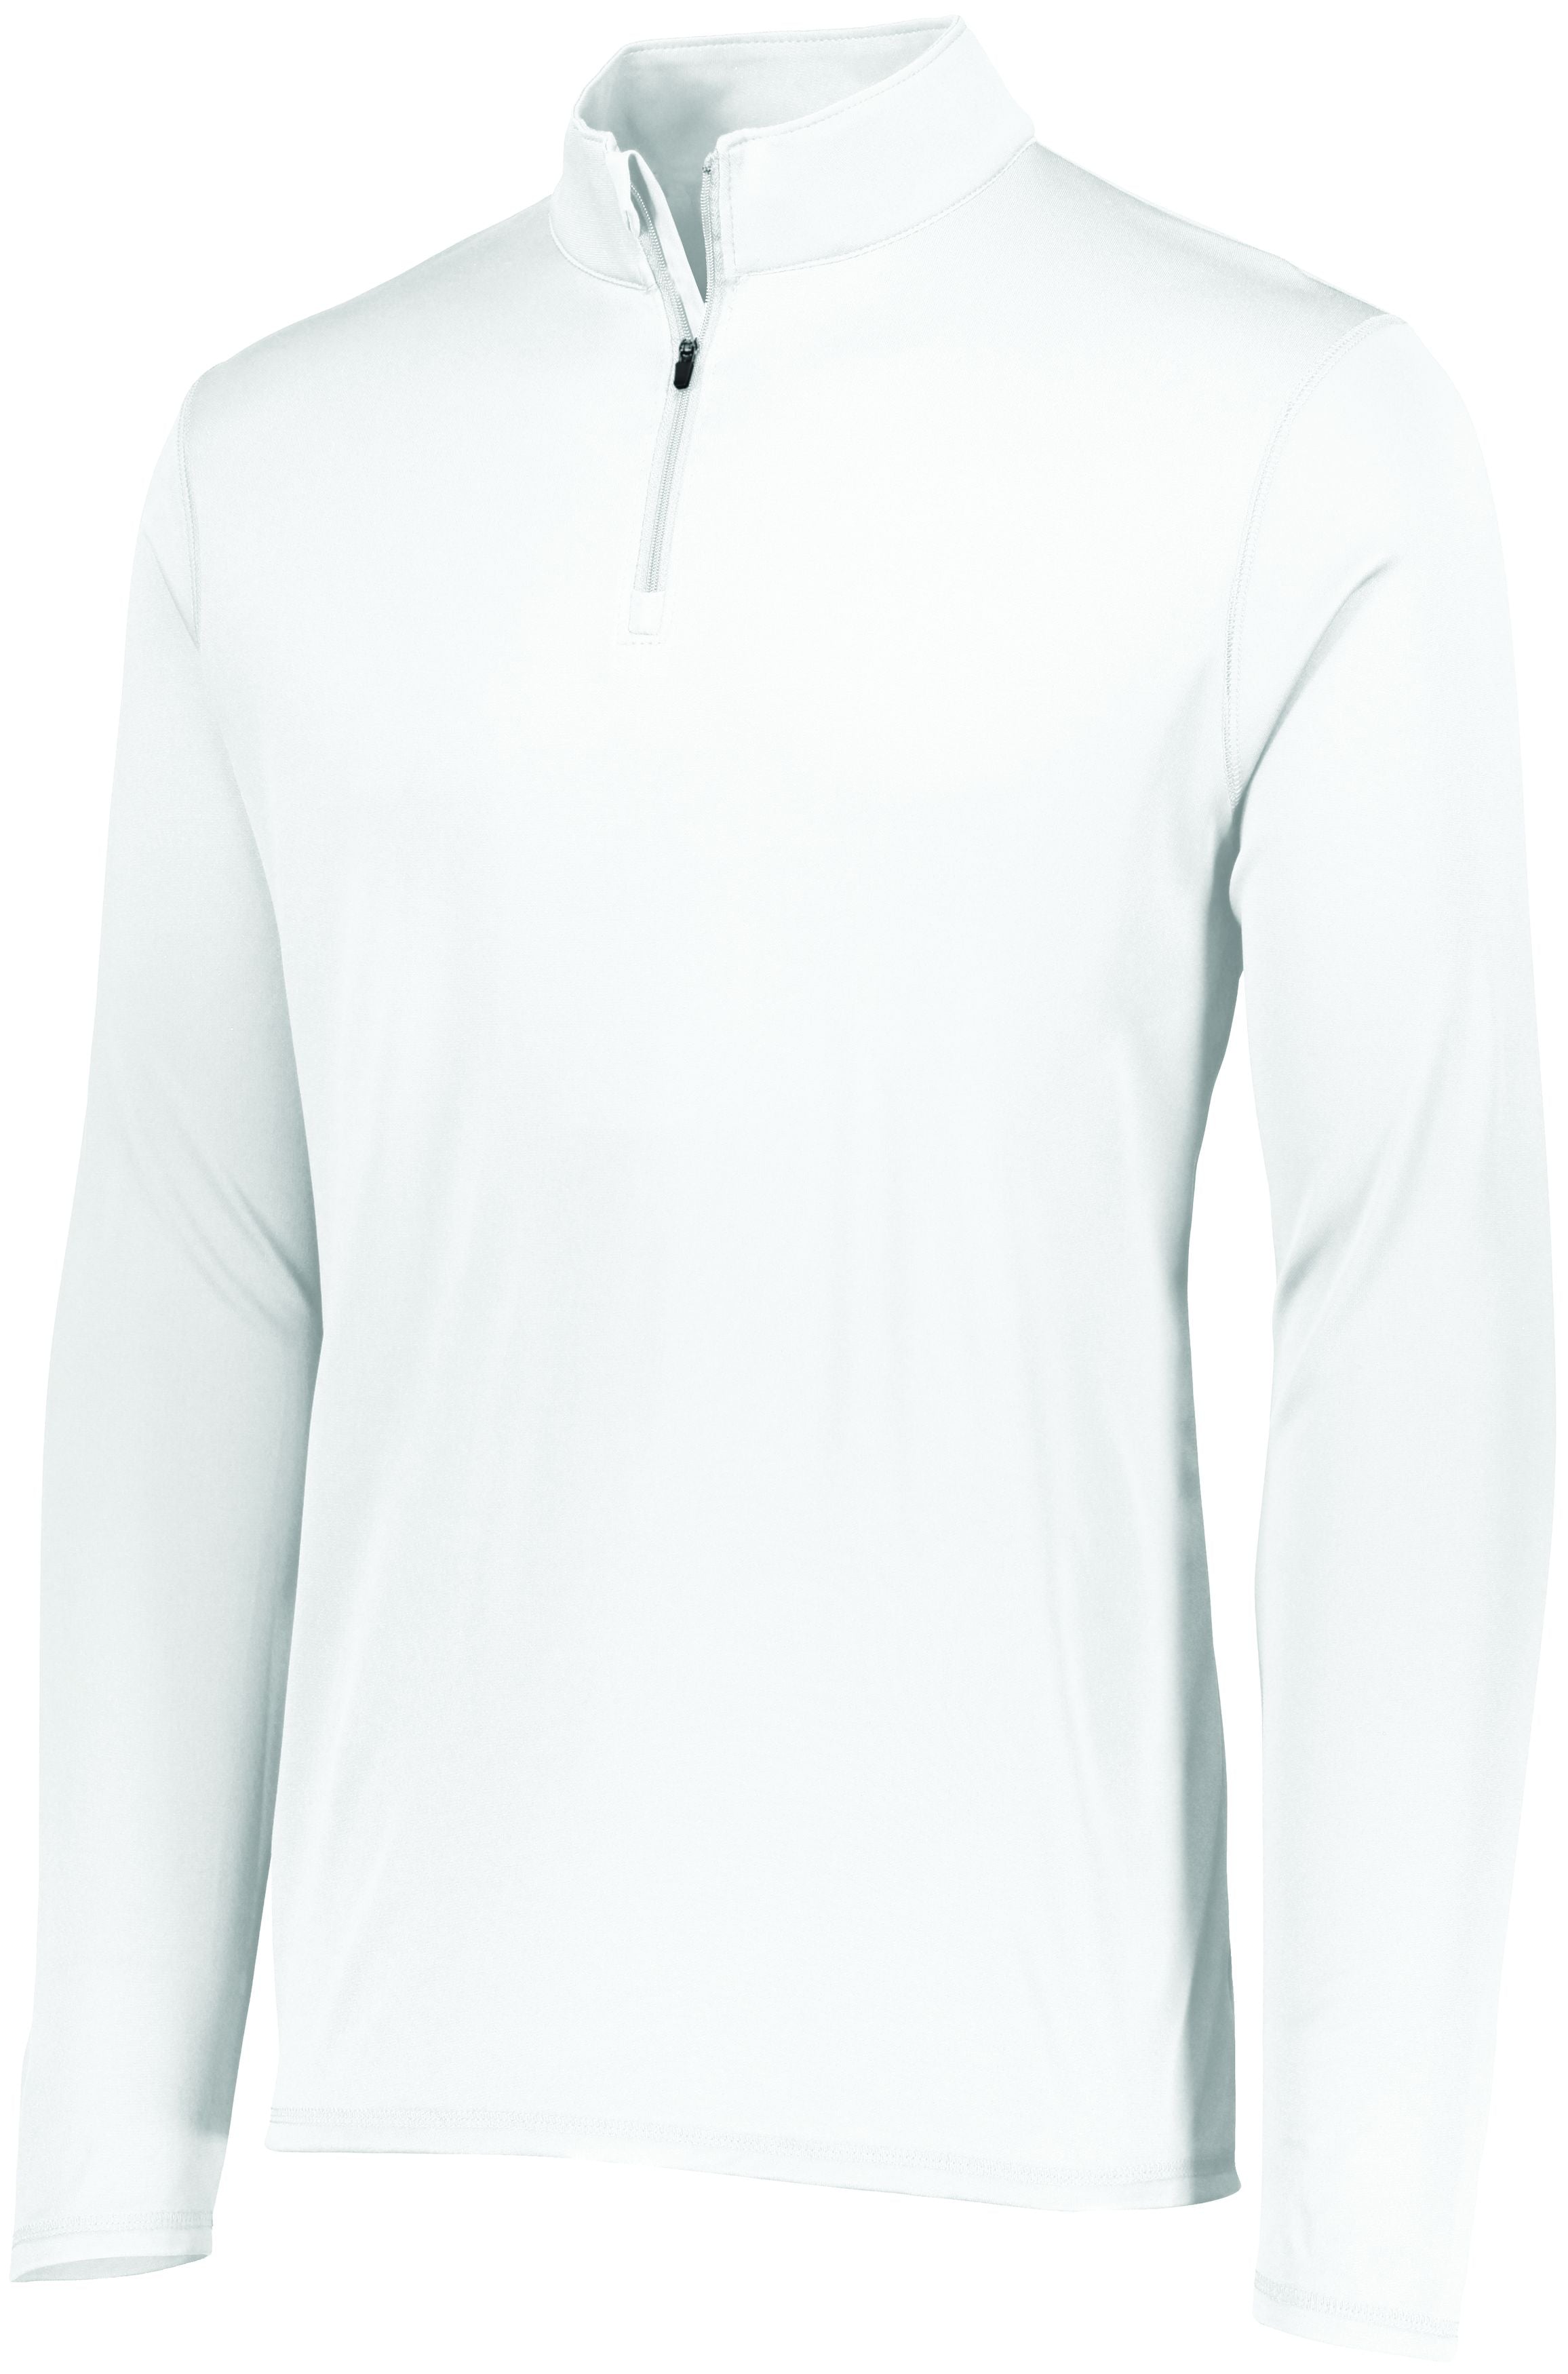 Augusta Sportswear Attain Wicking 1/4 Zip Pullover in White  -Part of the Adult, Adult-Pullover, Augusta-Products, Outerwear product lines at KanaleyCreations.com